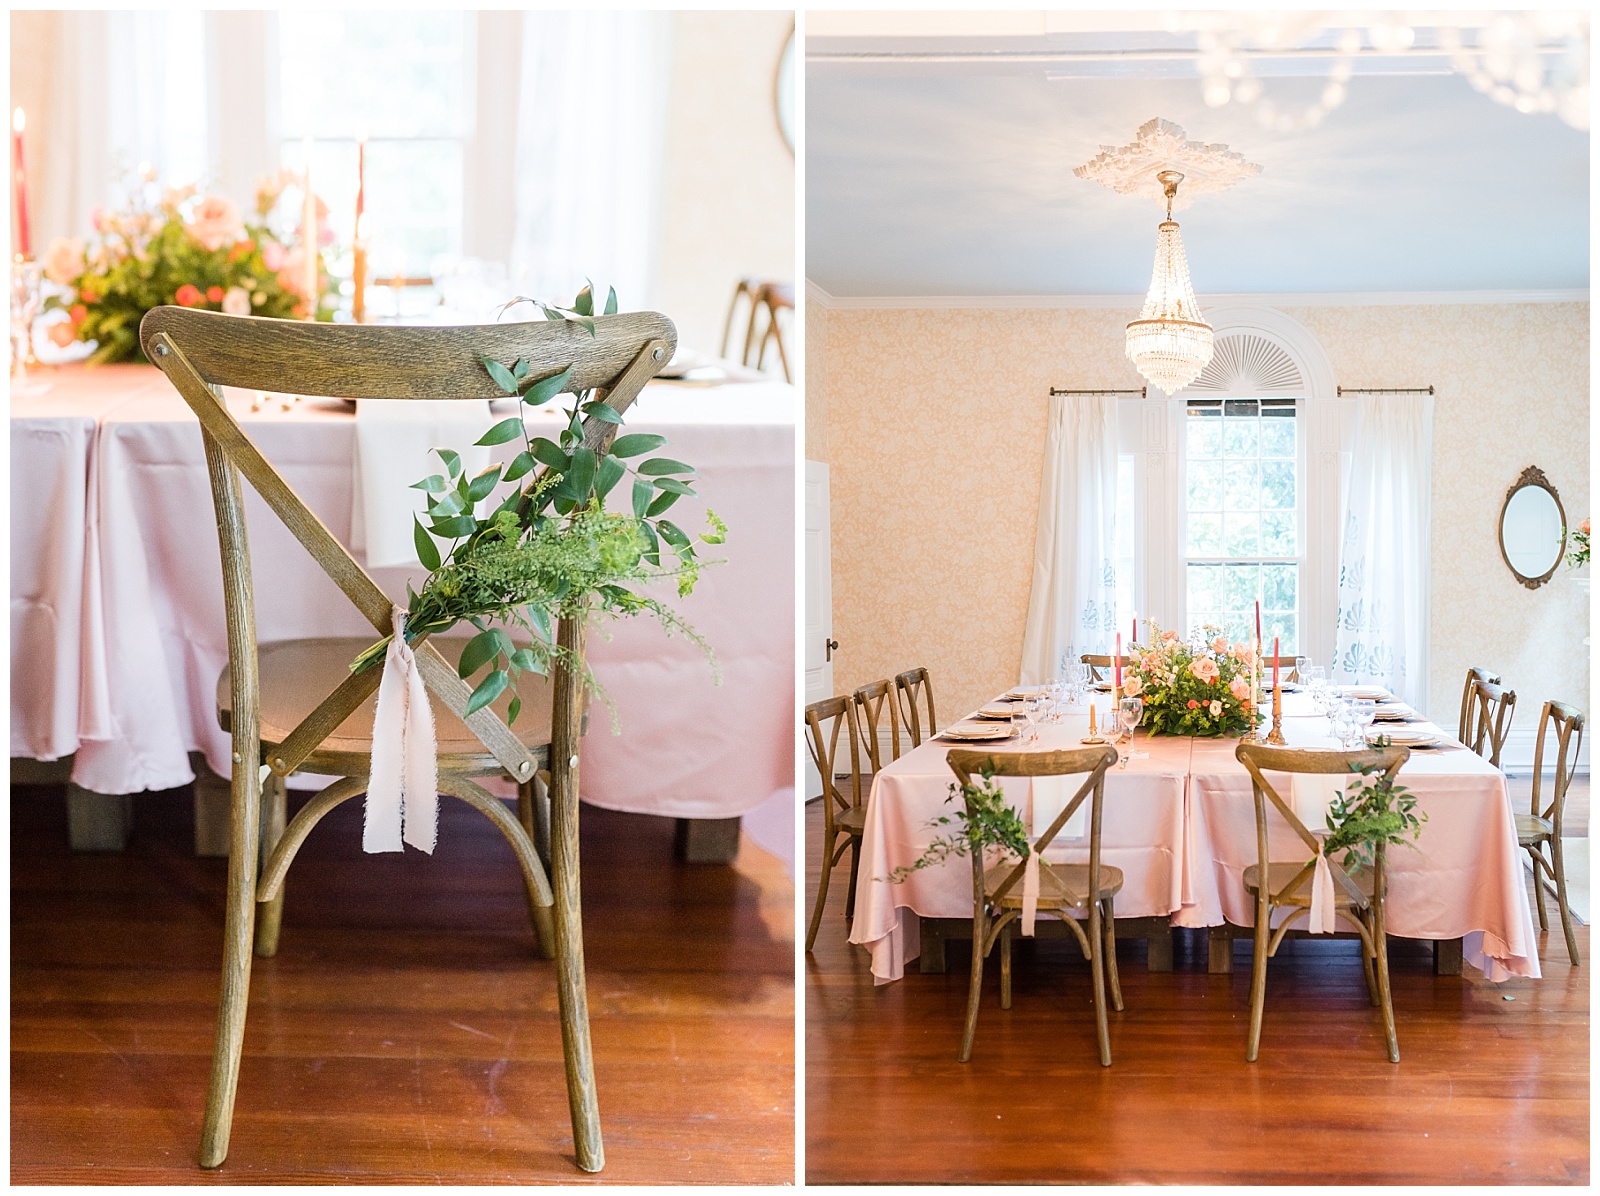 Holt House Nc reception dining room space decorated with tall taper candles, floral centerpieces, mantle decor, and pink and gold accents